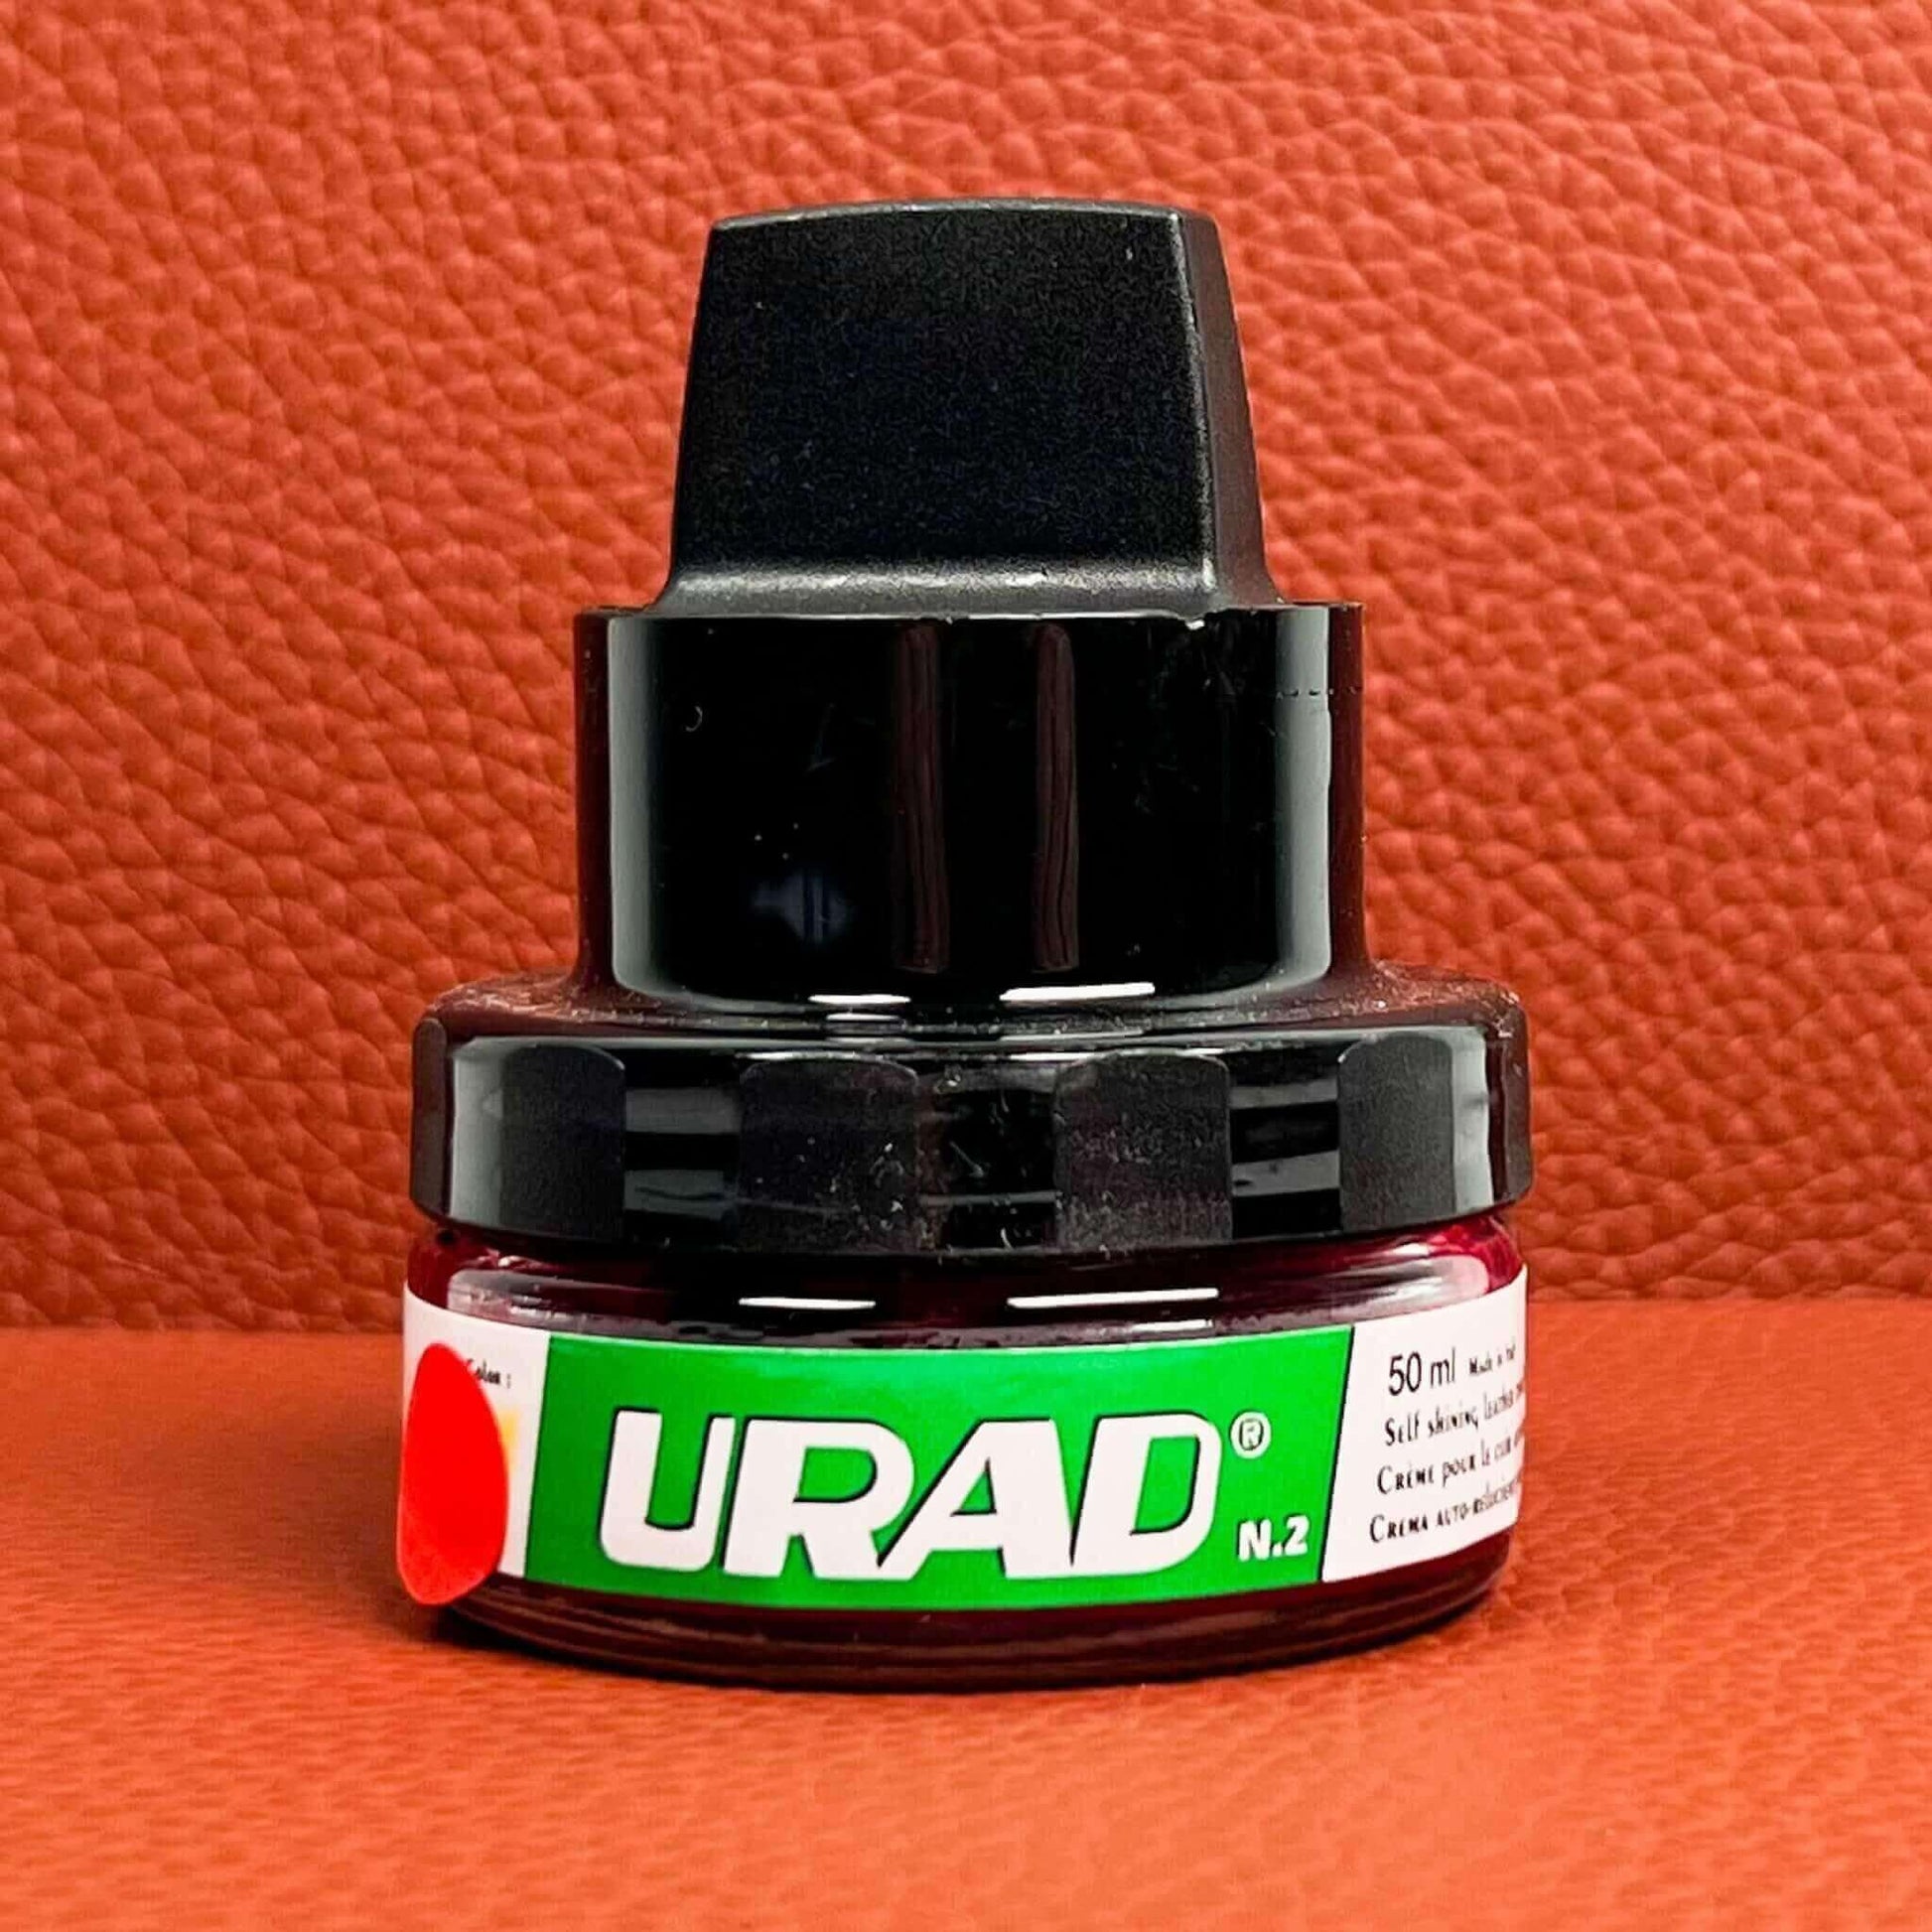 If you're looking for the best boot conditioner for your red faux leather boots, Urad red leather conditioner is an excellent choice.